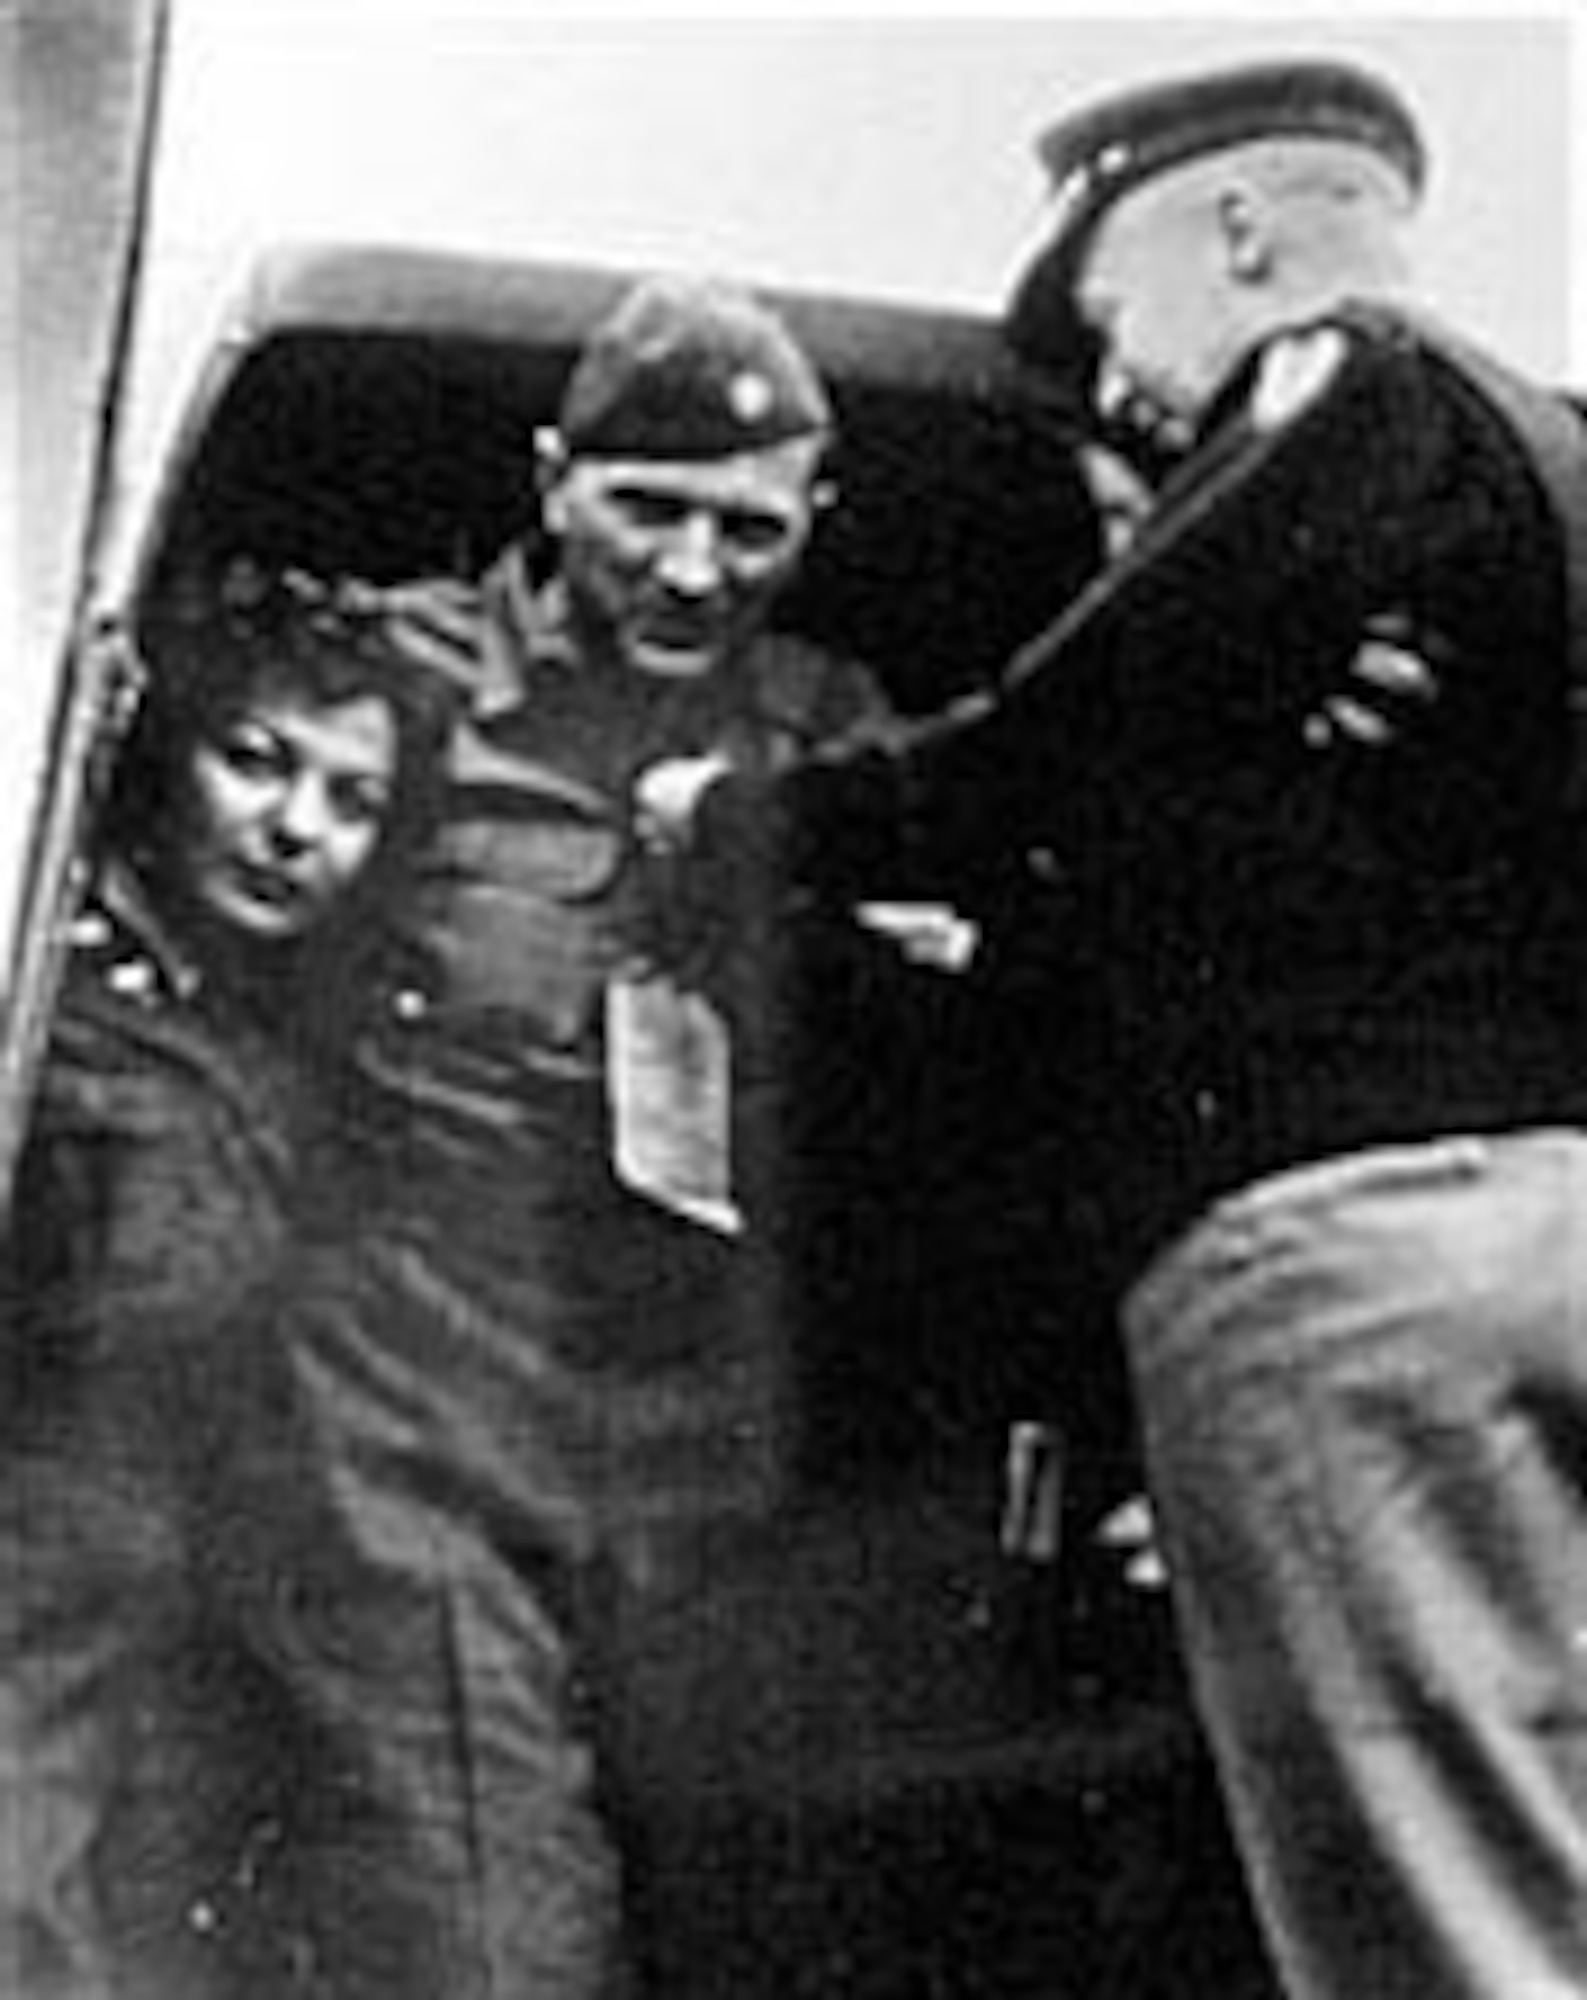 Lt. Col. Michael "Mike" C. Murphy (center), a pre-World War II stunt pilot who later directed the AAF glider pilot training program. He developed new tow techniques, assisted in the planning for the D-Day invasion of France and led the gliders into Normandy. Here, while preparing for medical evacuation to the United States, he received the Purple Heart for injuries suffered in the crash of the glider during the Normandy Invasion. (U.S. Air Force photo)